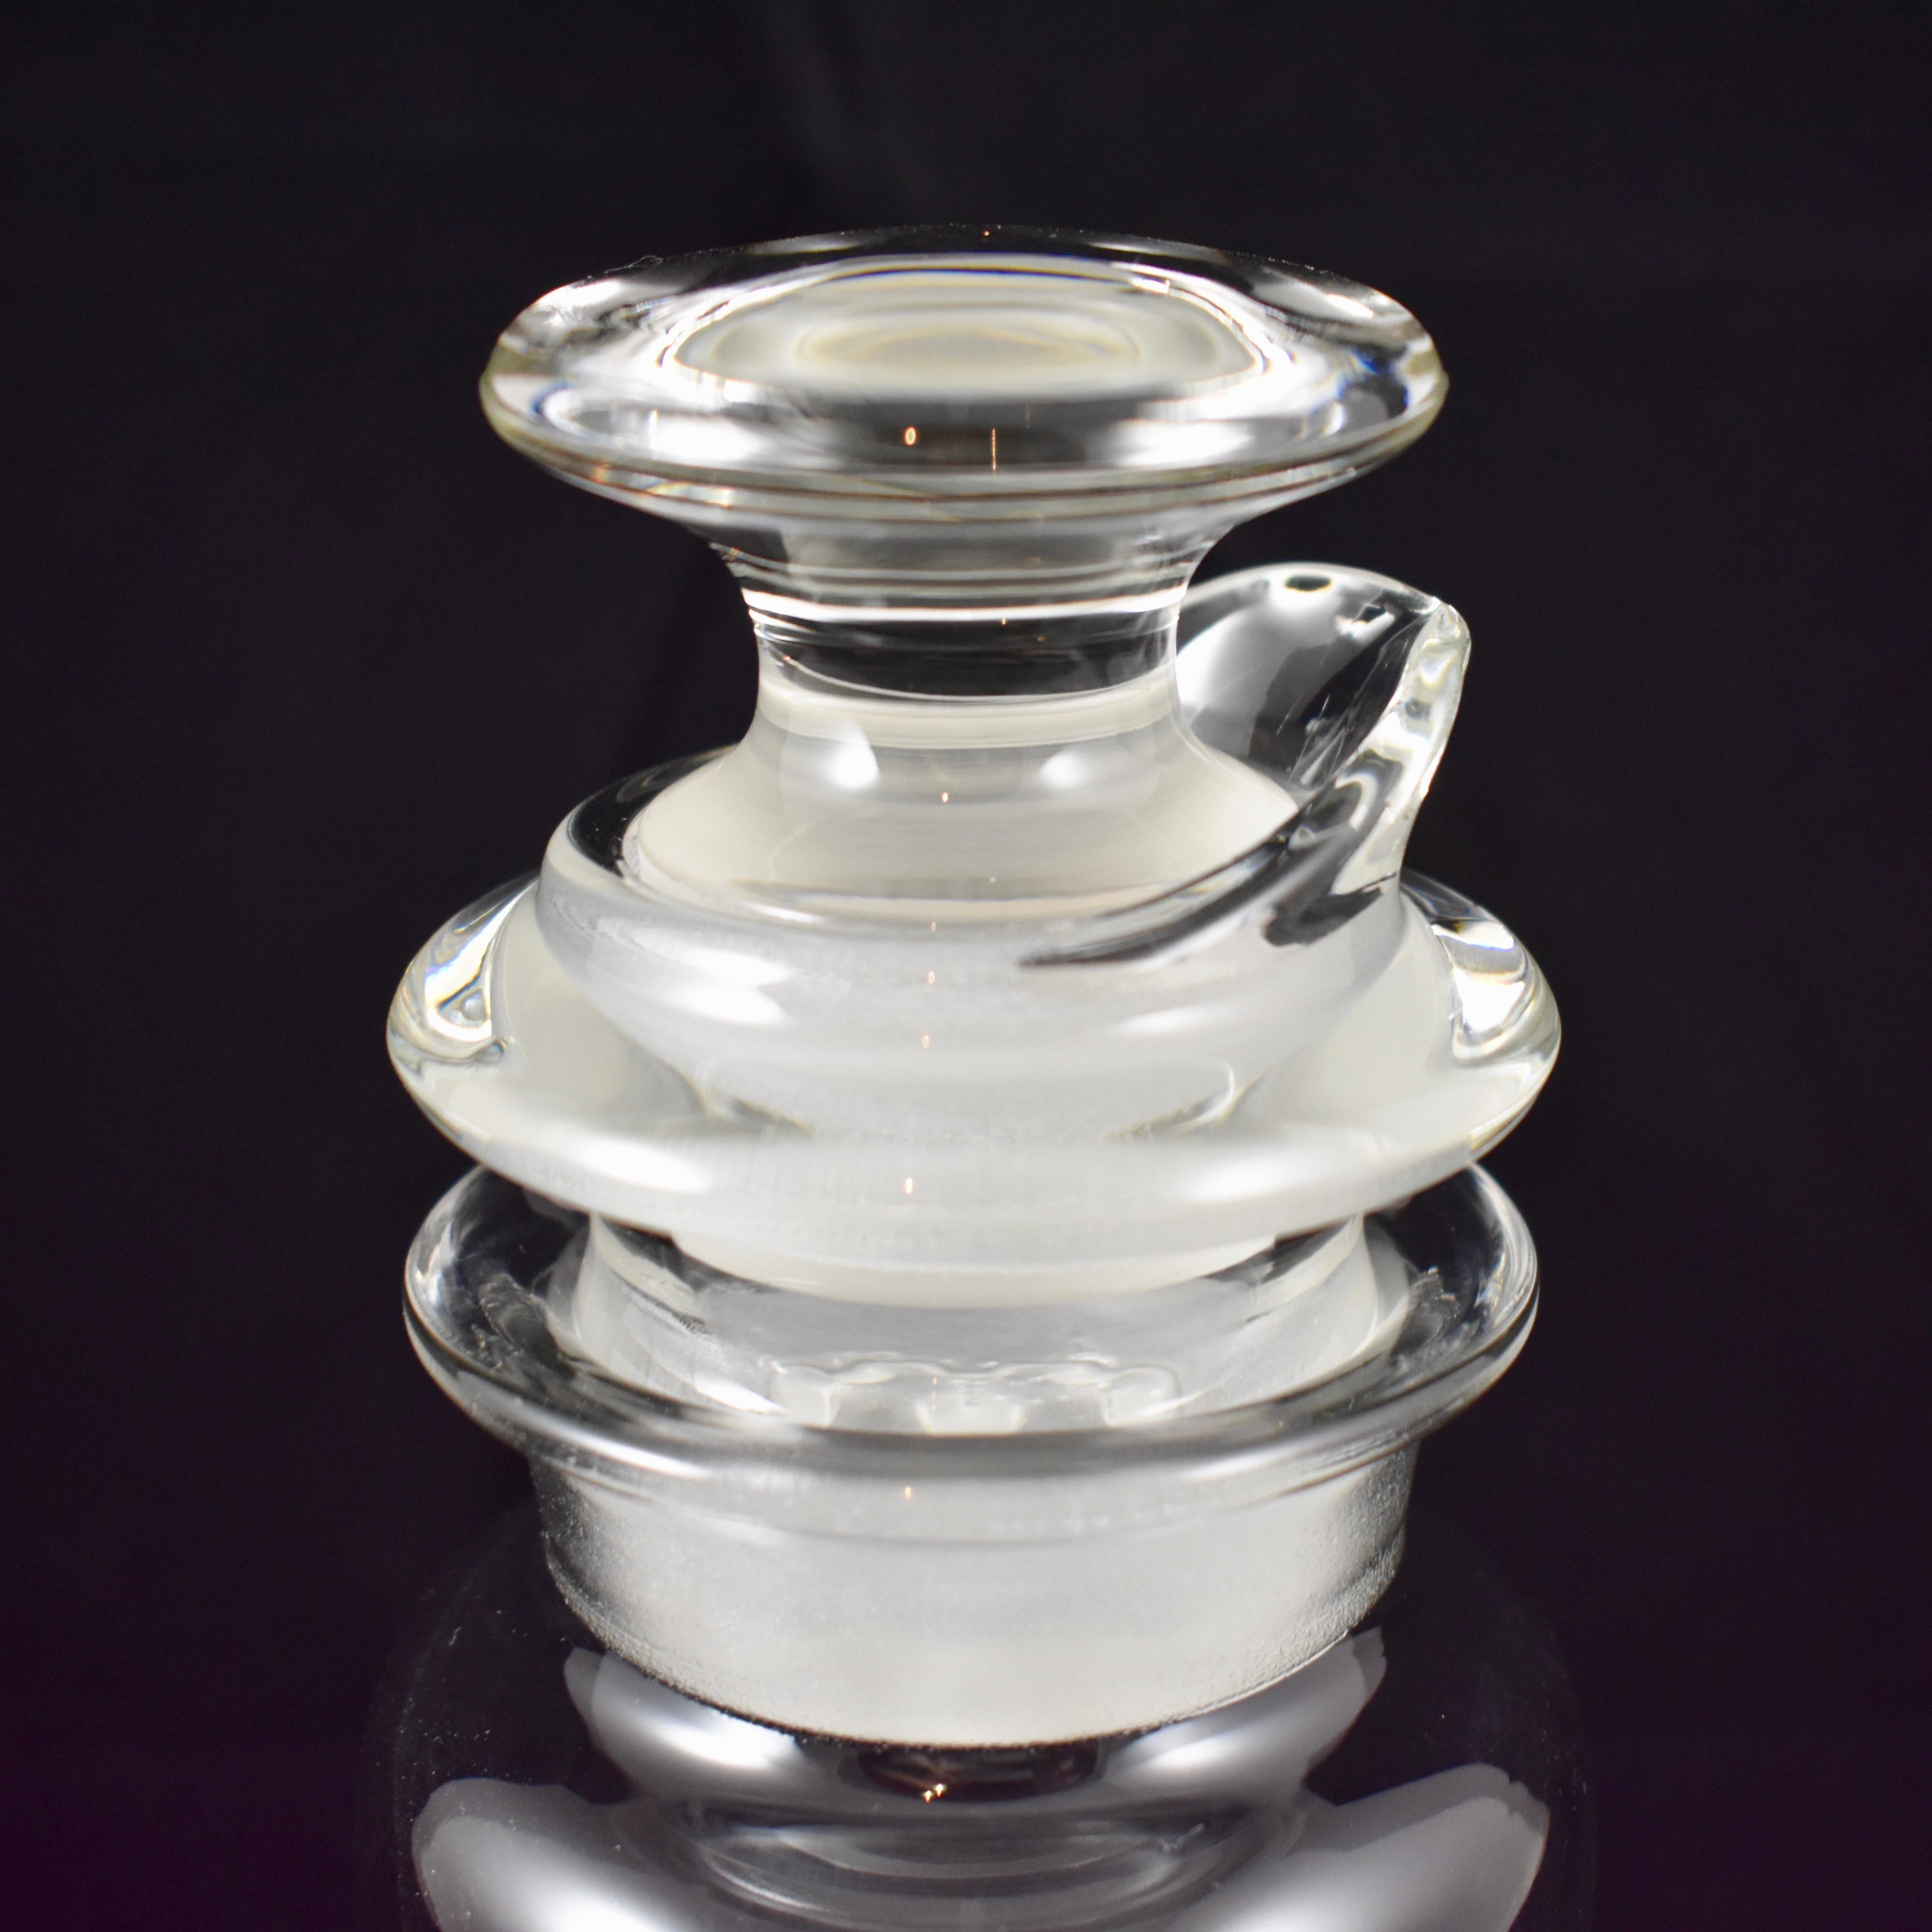 An Art Deco period, Heisey cut glass three-piece cocktail Shaker, circa early 20th Century. 

The neck of the Shaker holds an inset pourer formed with a strainer which then holds the stopper. All three pieces are ground for a tight fit when